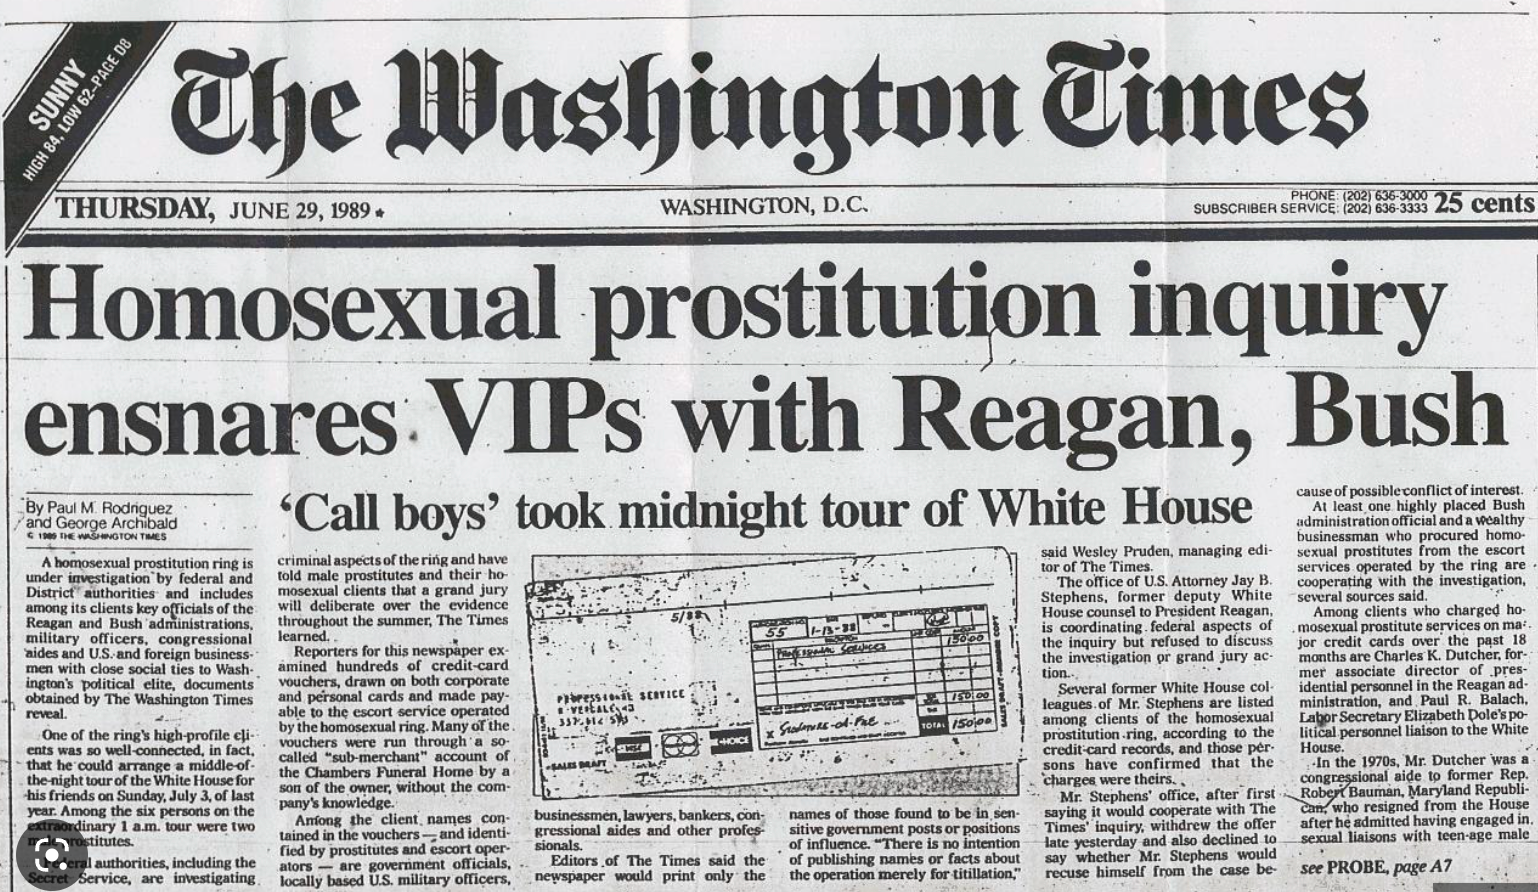 Washington Times child trafficking article front page 1989